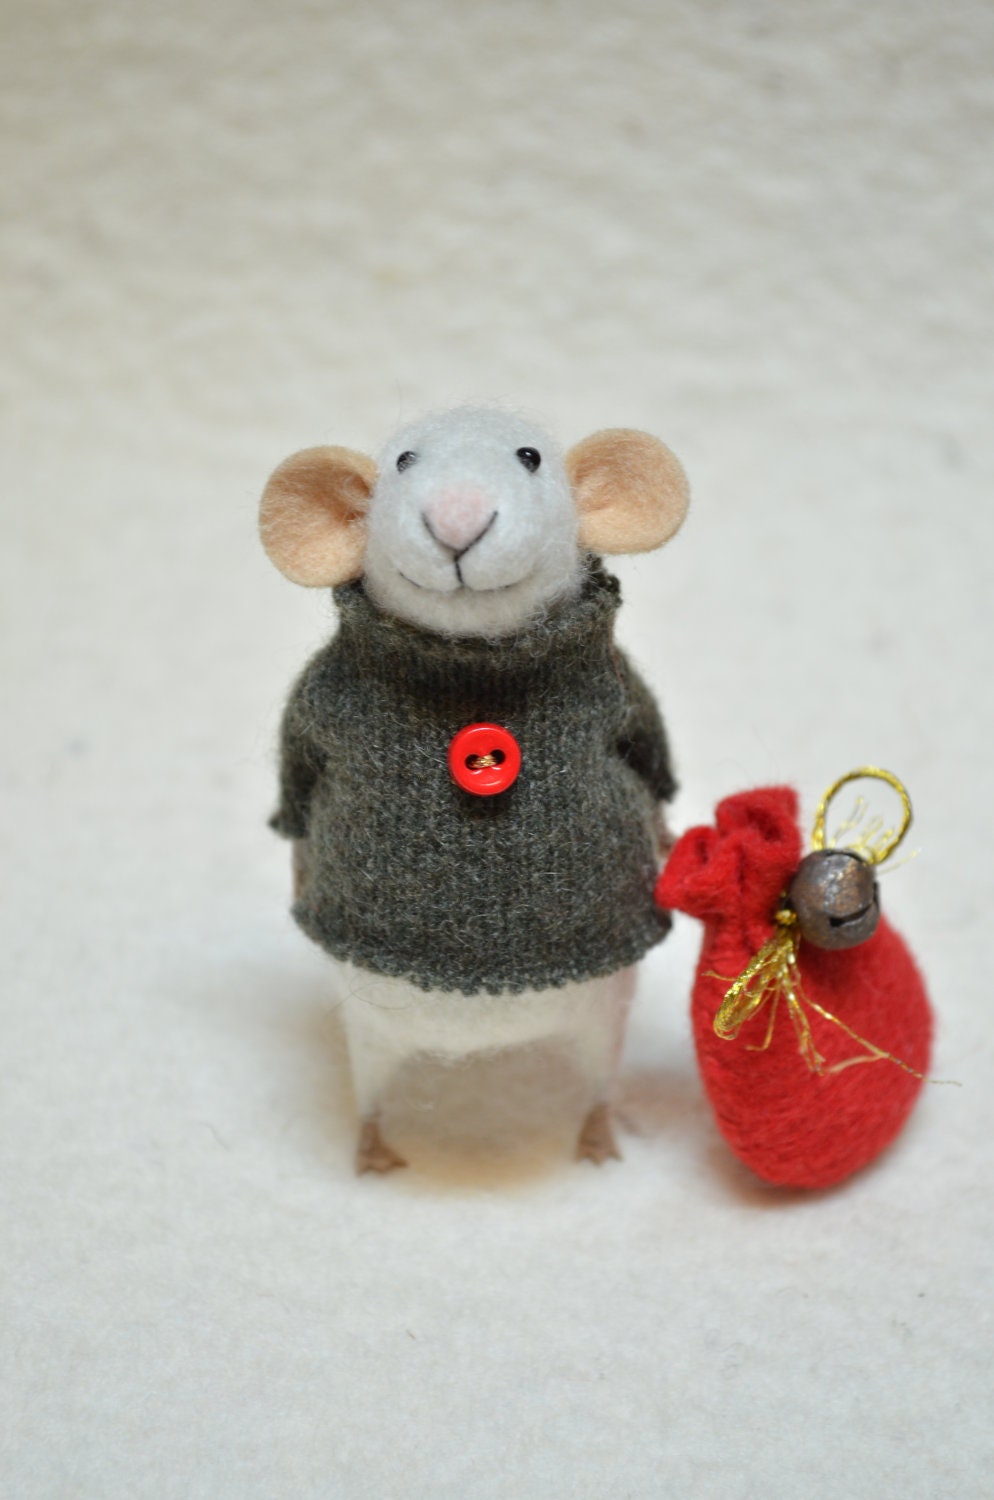 CHRISTMAS MOUSE - unique - needle felted ornament animal, felting dreams made to order